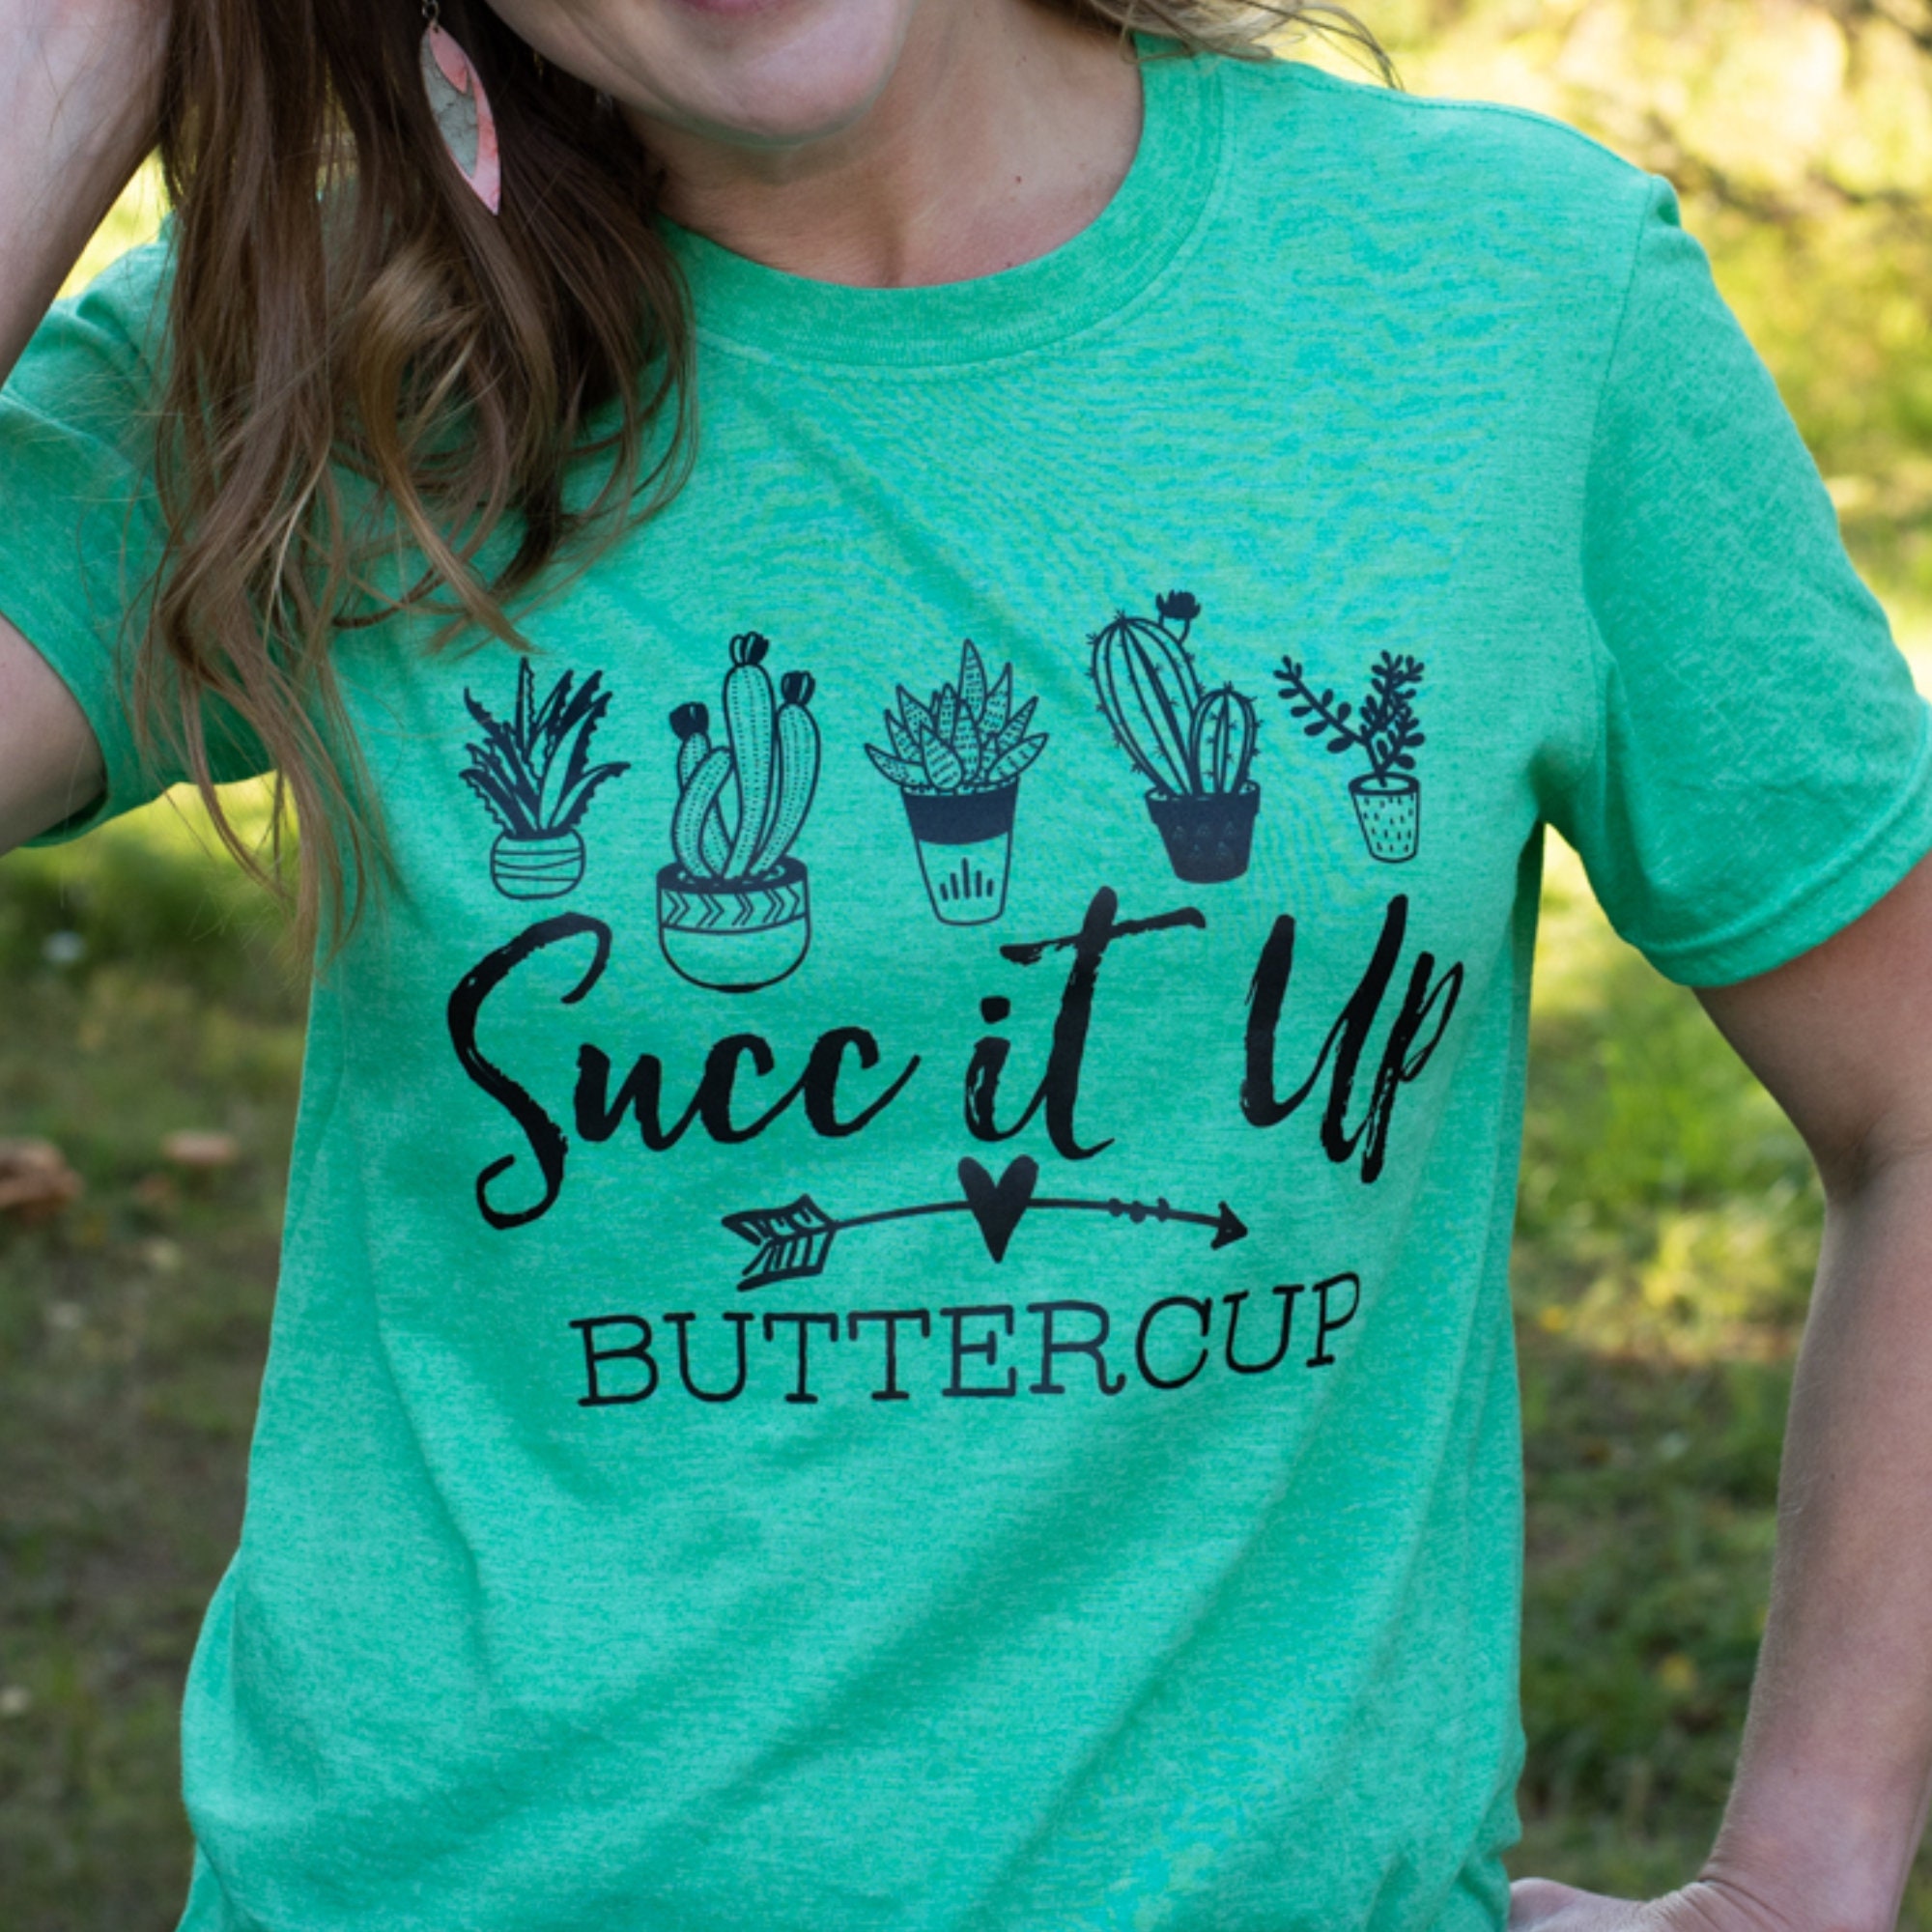 Bella Canvas tees in many colors! Suck it up Buttercup Tshirt Soft